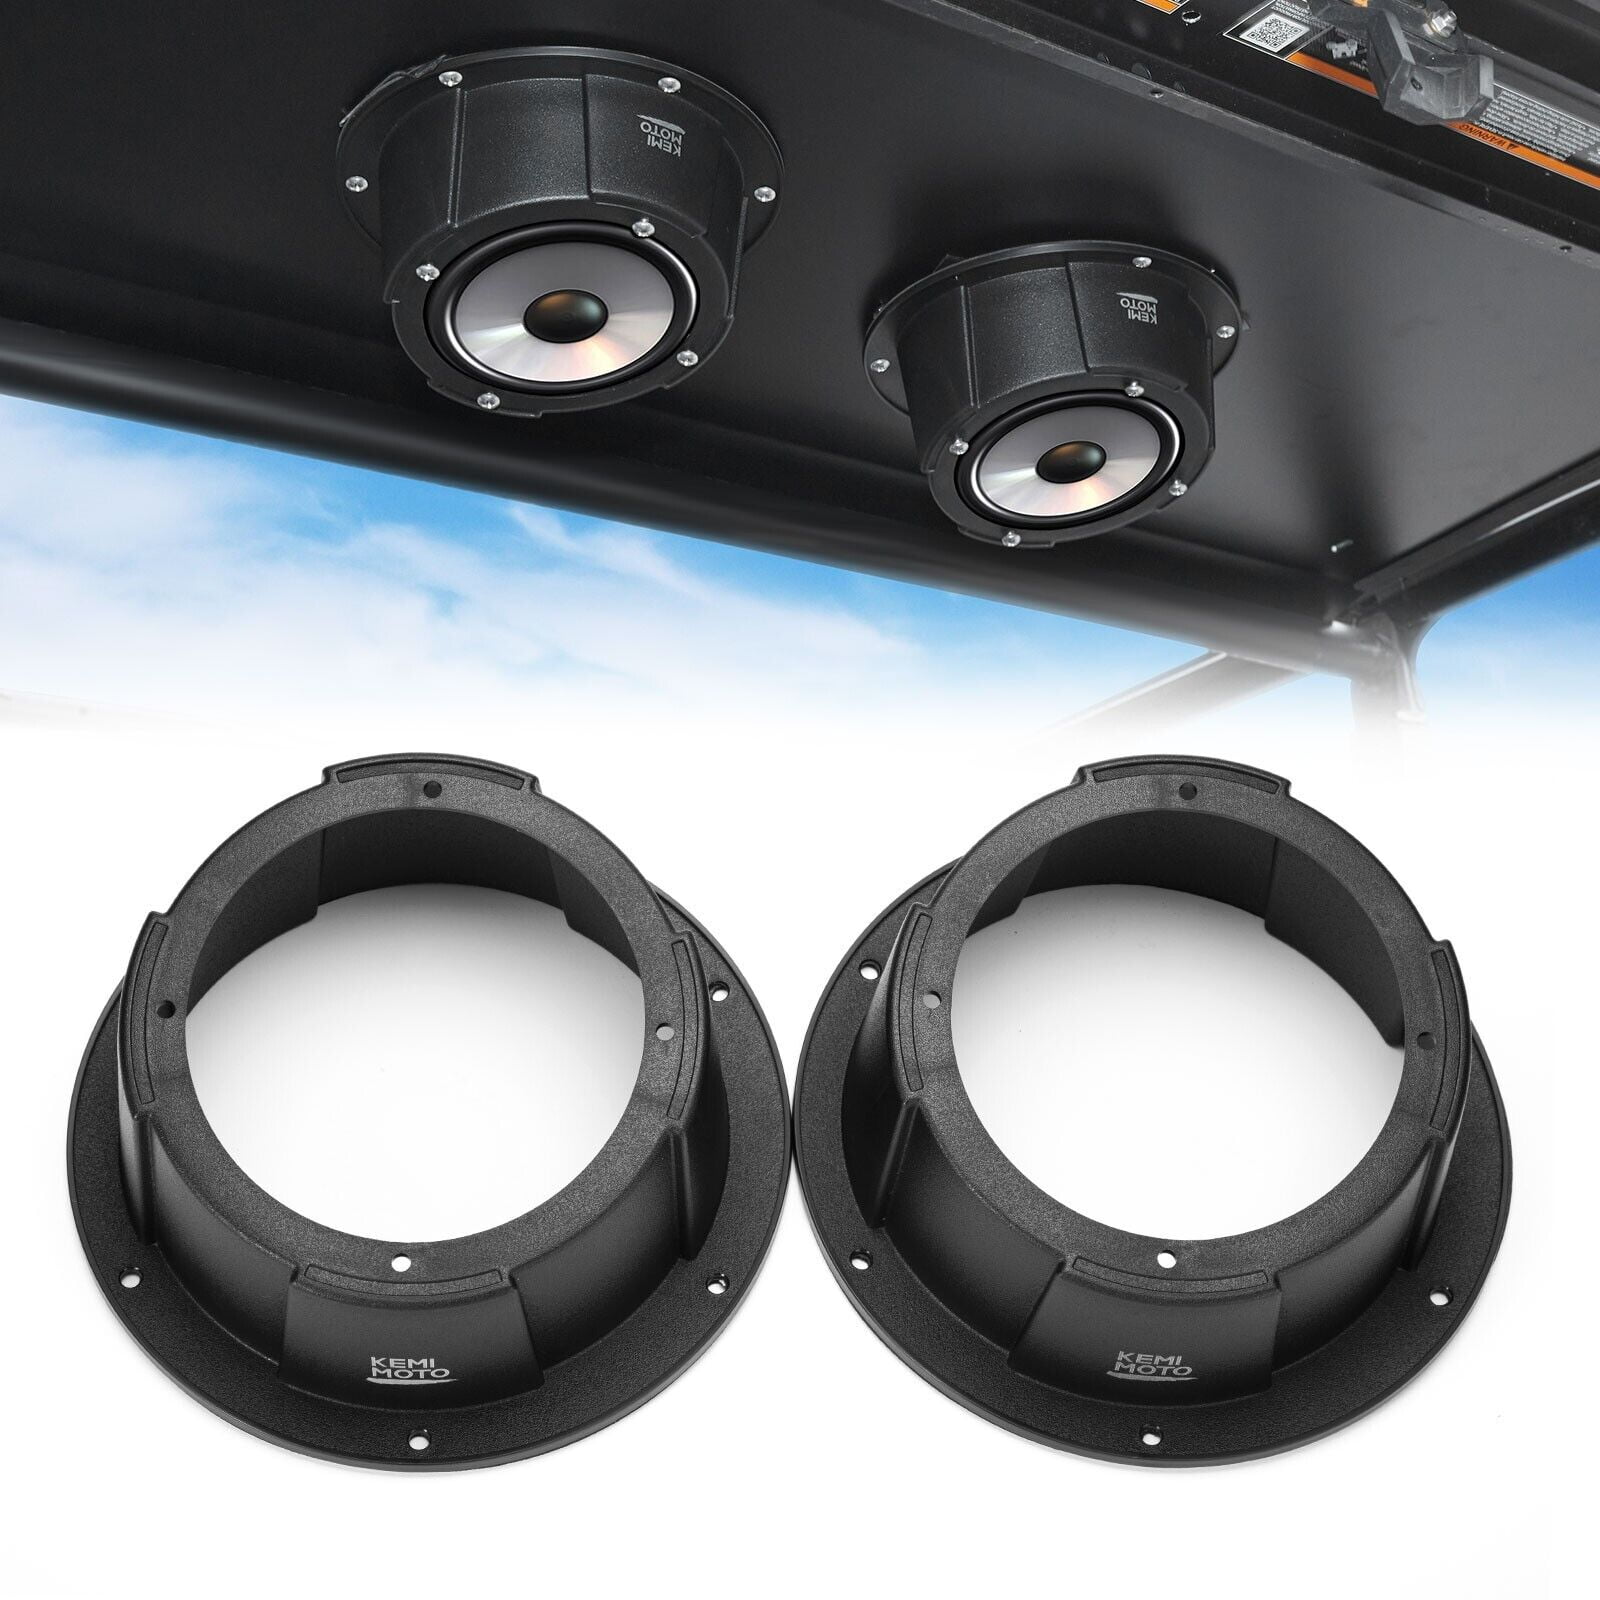 KEMIMOTO 6.5 Inch Speaker Pod, Universal Angled Boxes Enclosure for 6.5